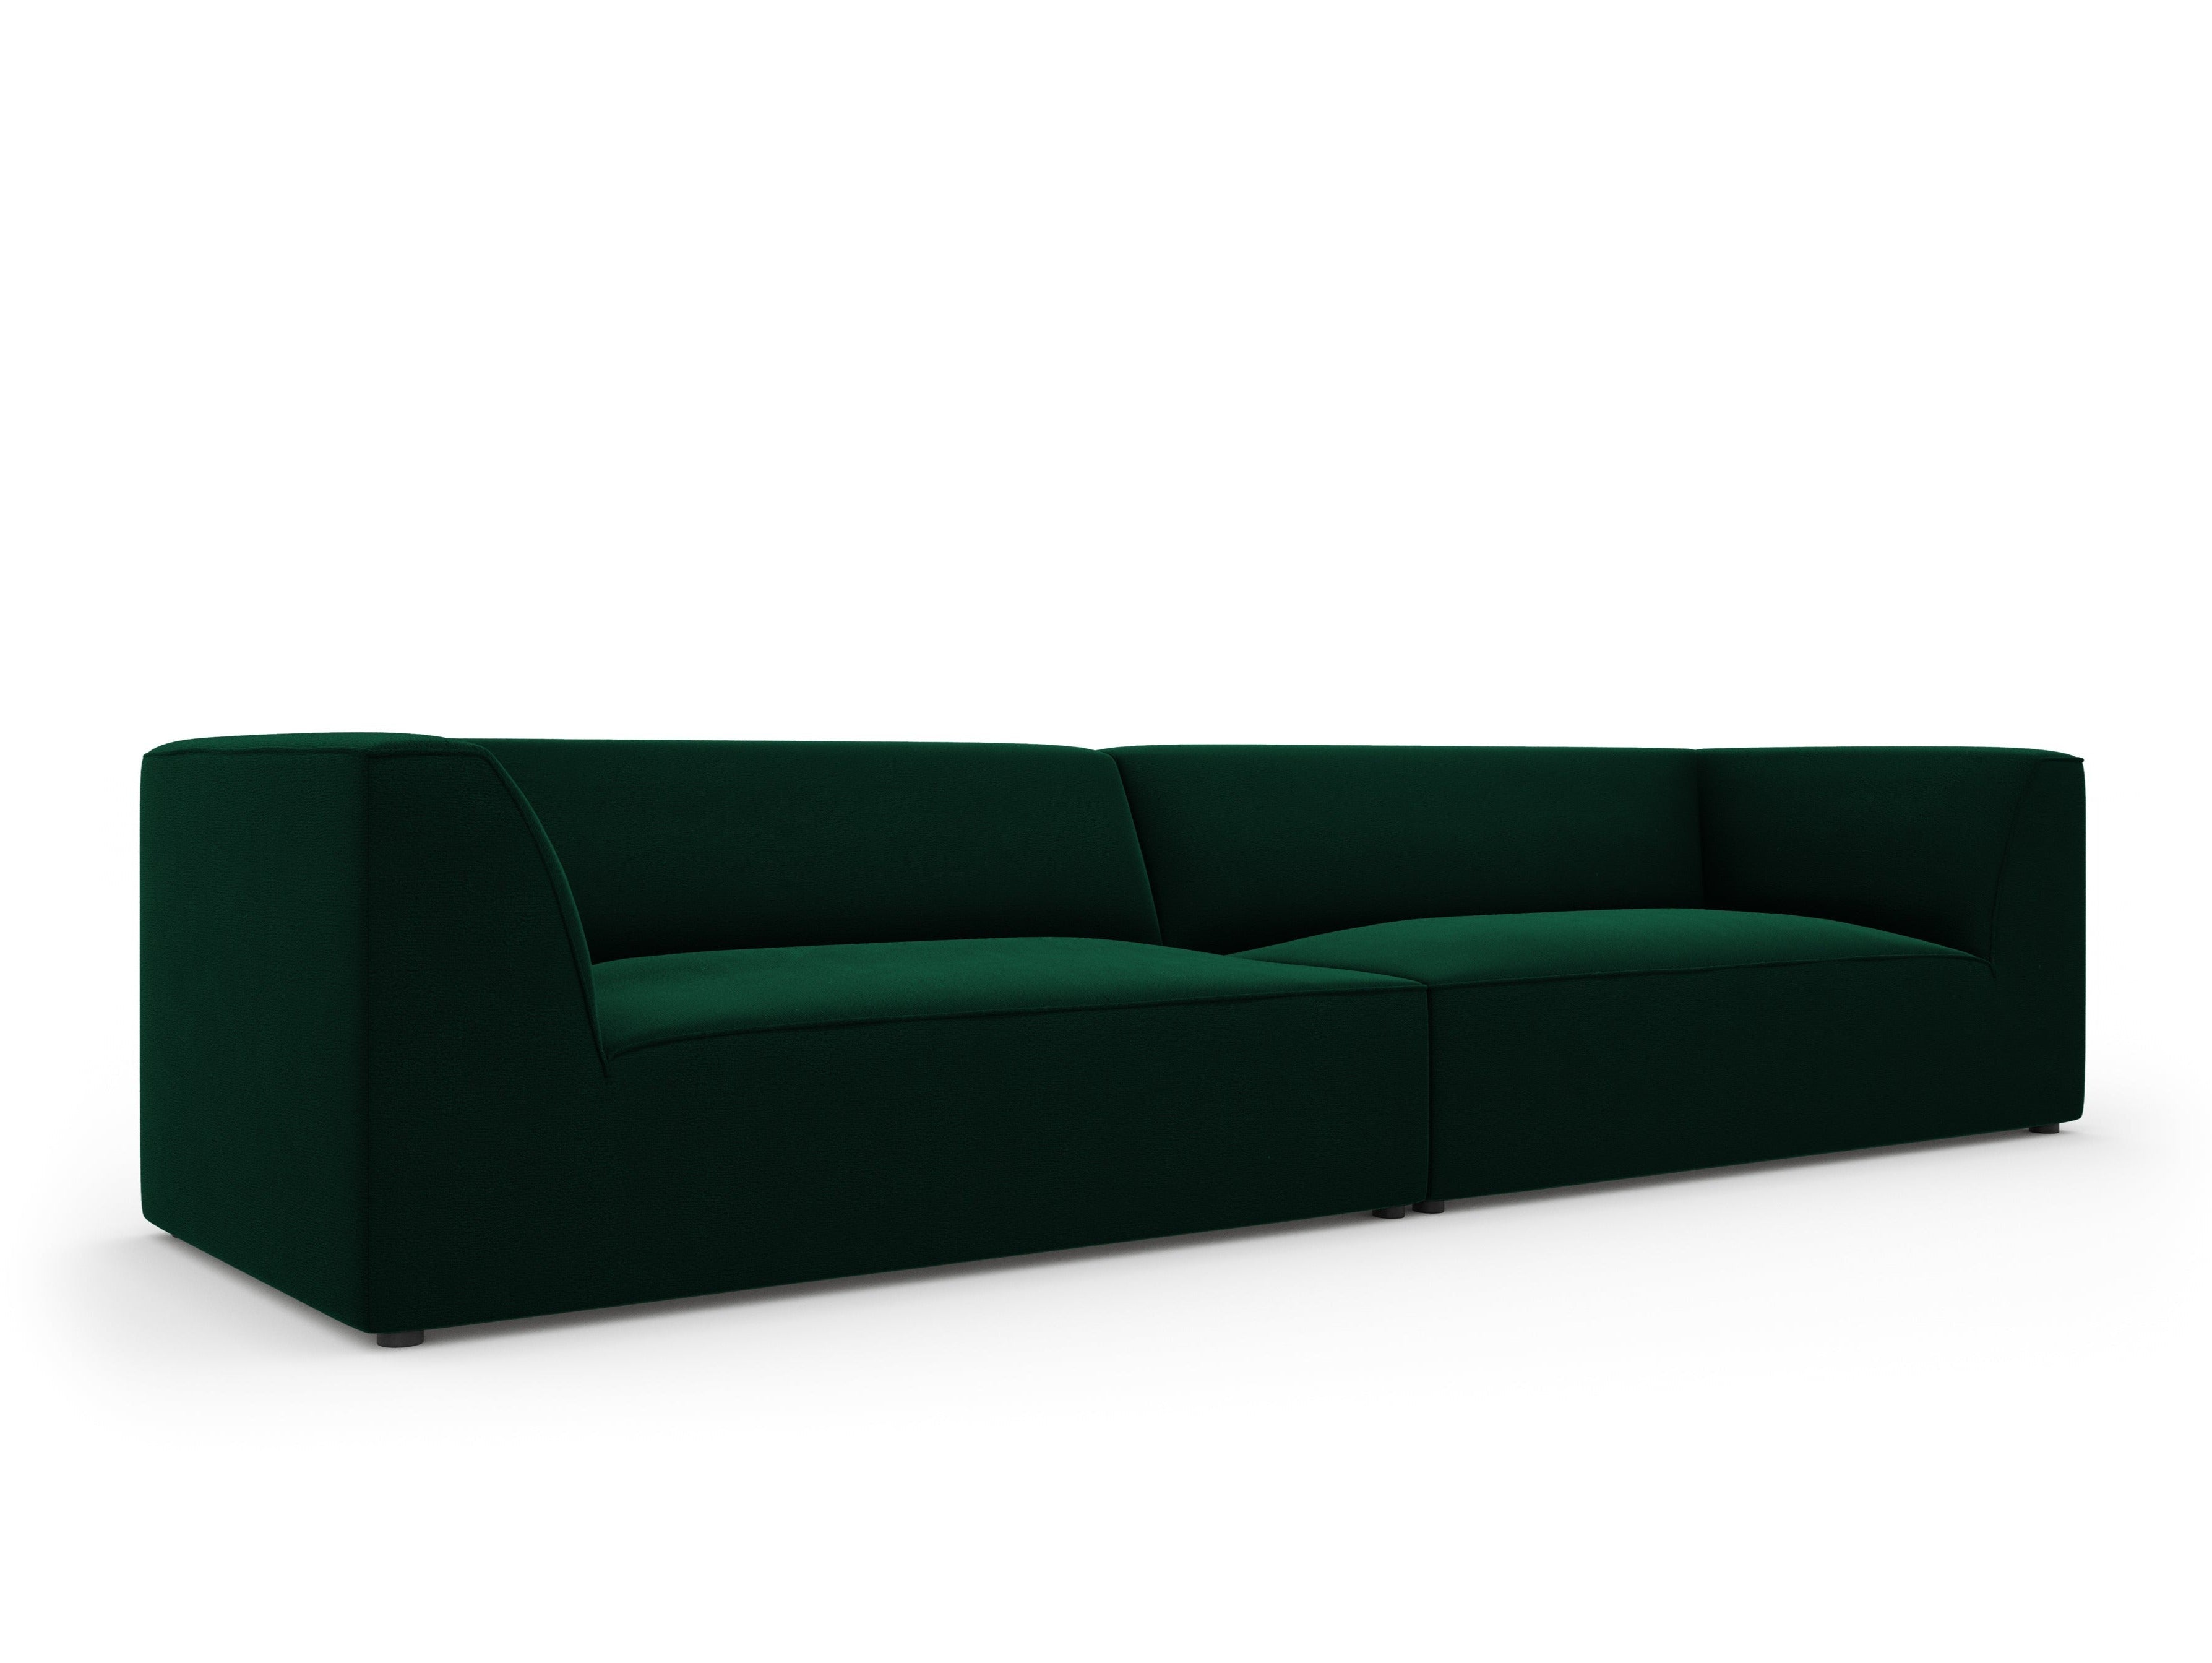 Sofa with glossy bottle green